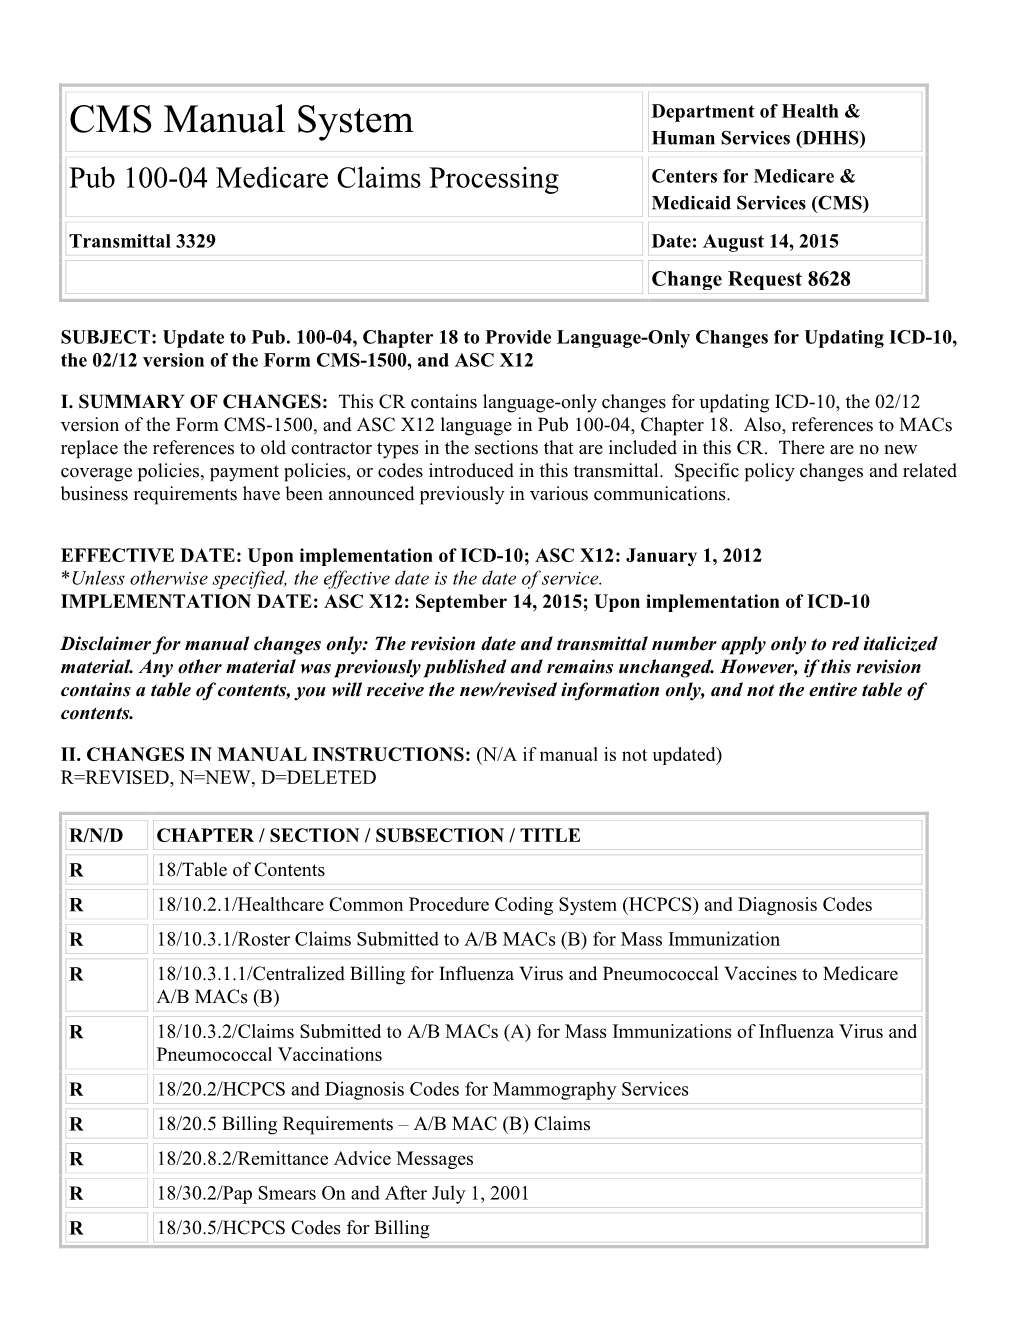 Pub 100-04 Medicare Claims Processing Centers for Medicare & Medicaid Services (CMS) Transmittal 3329 Date: August 14, 2015 Change Request 8628